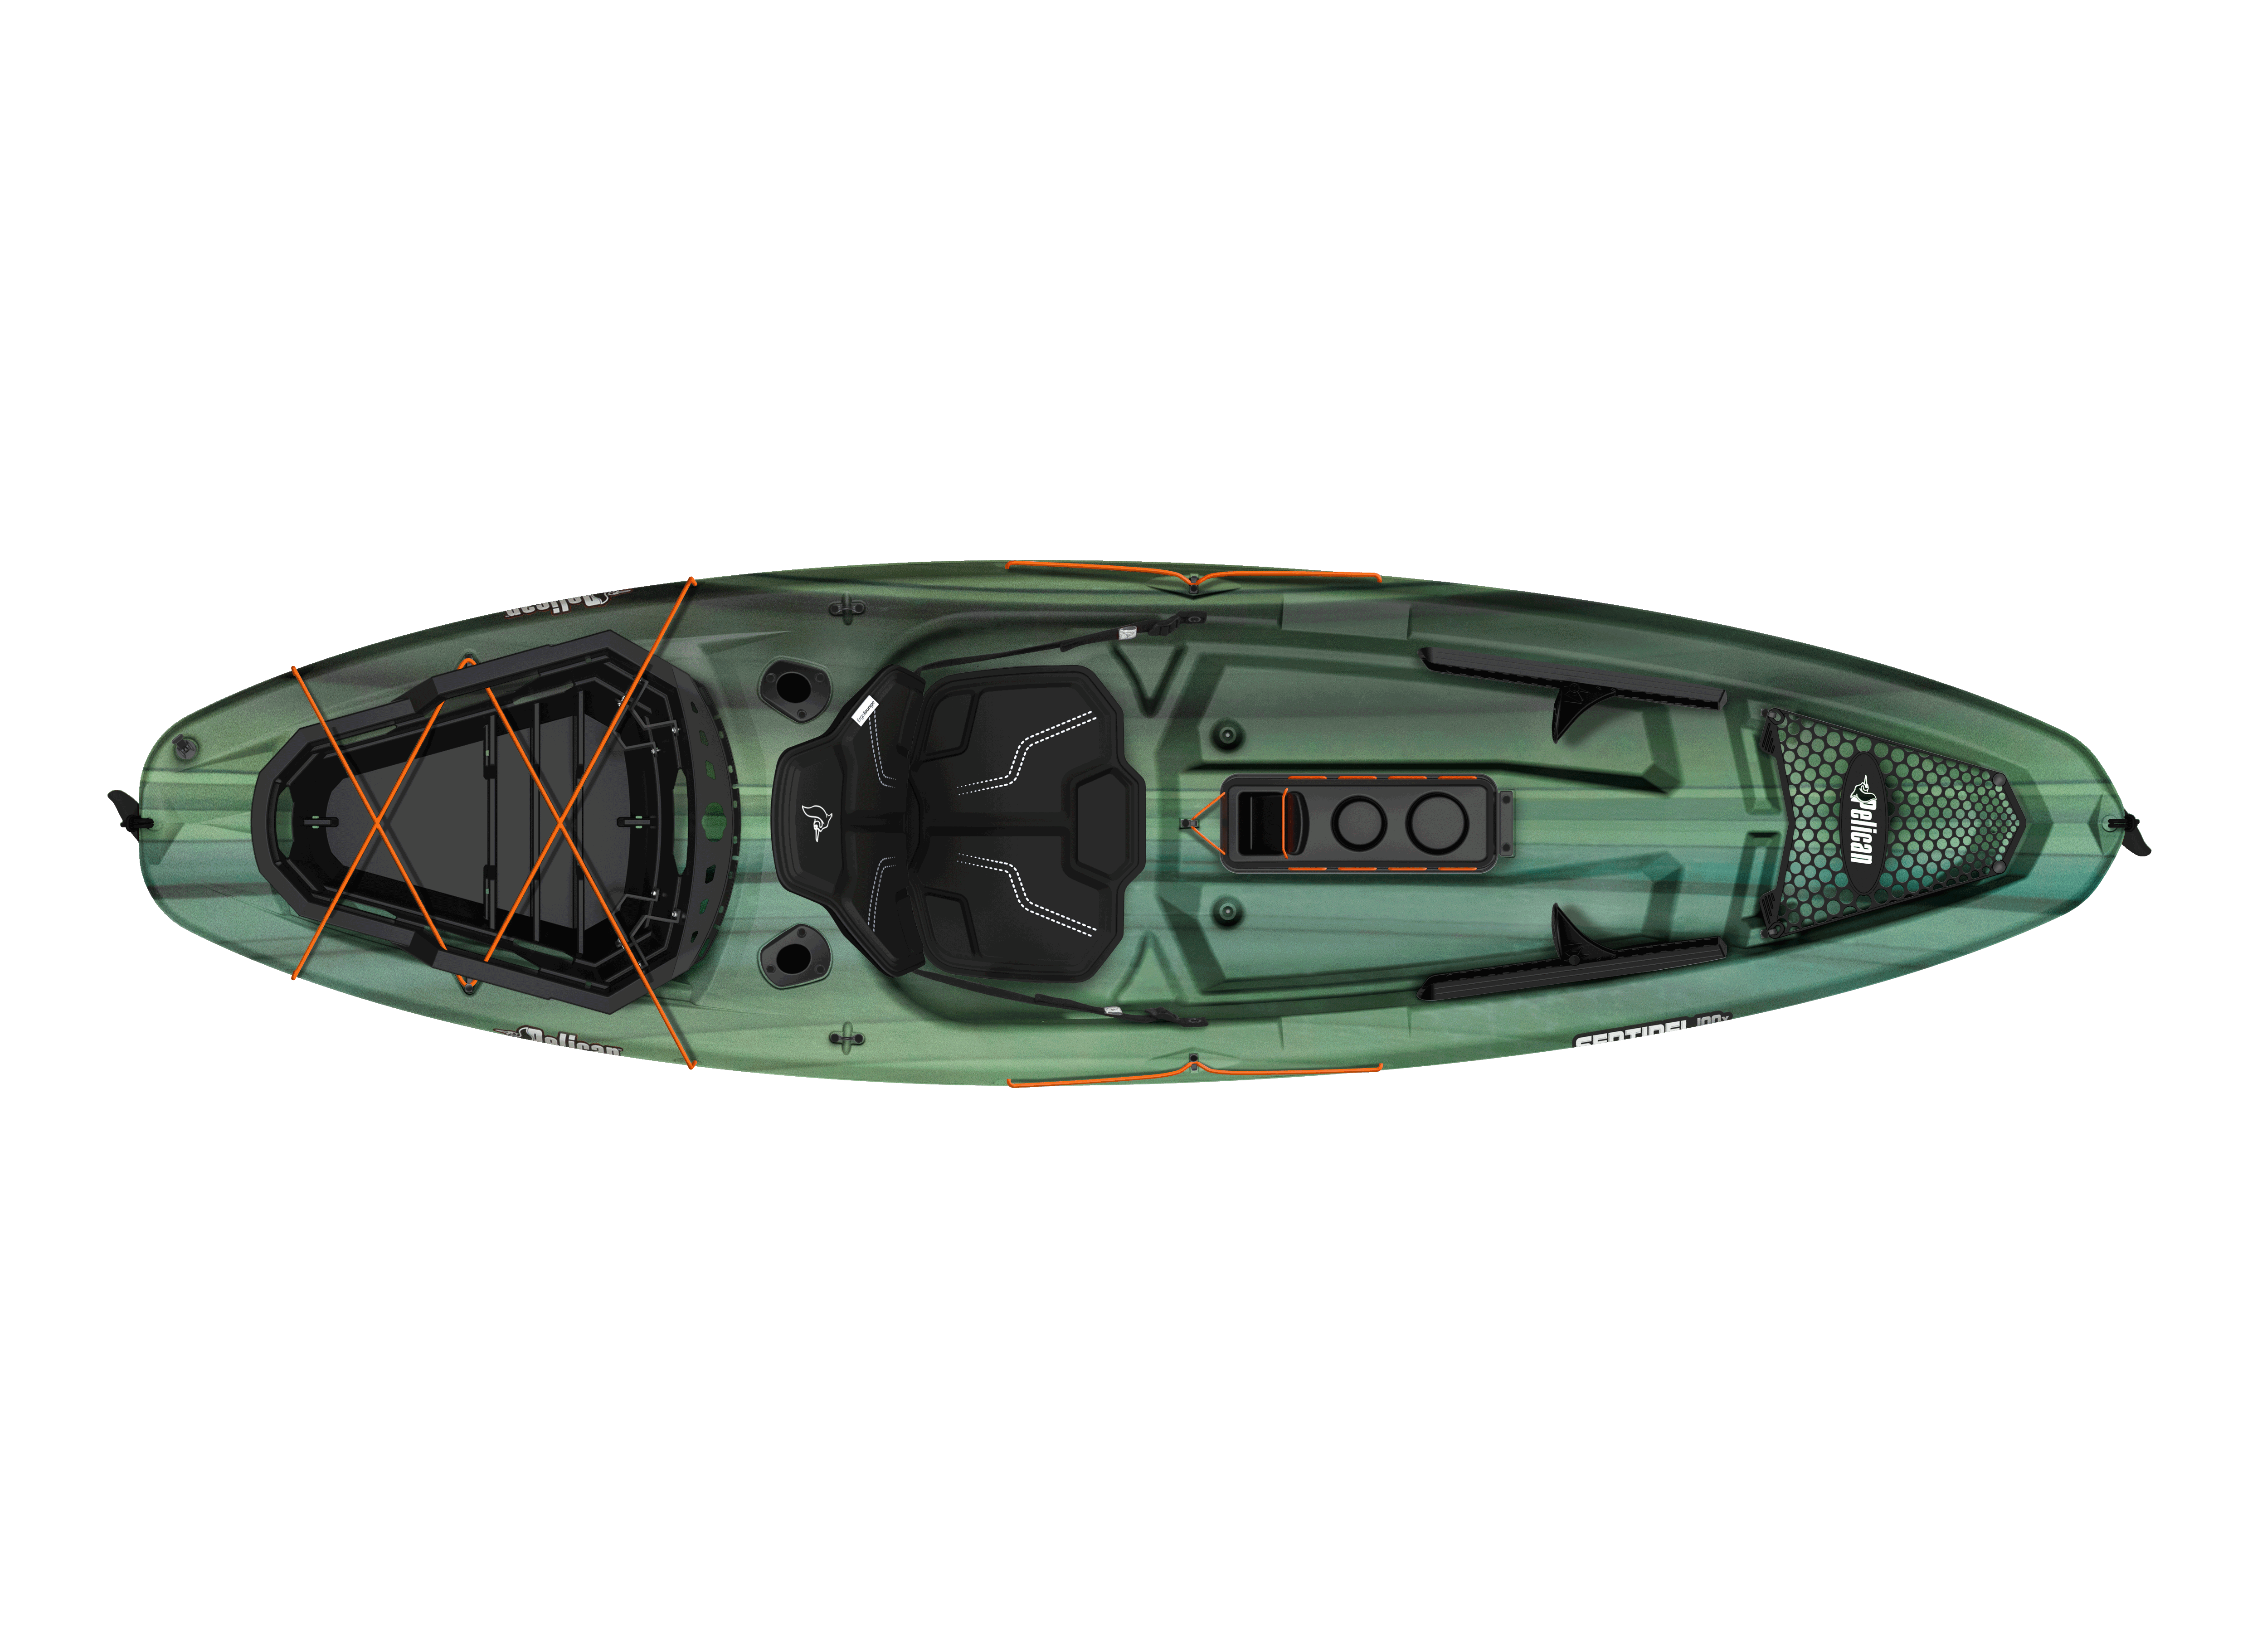 Pelican, Sentinel 100X Angler [Paddling Buyer's Guide]